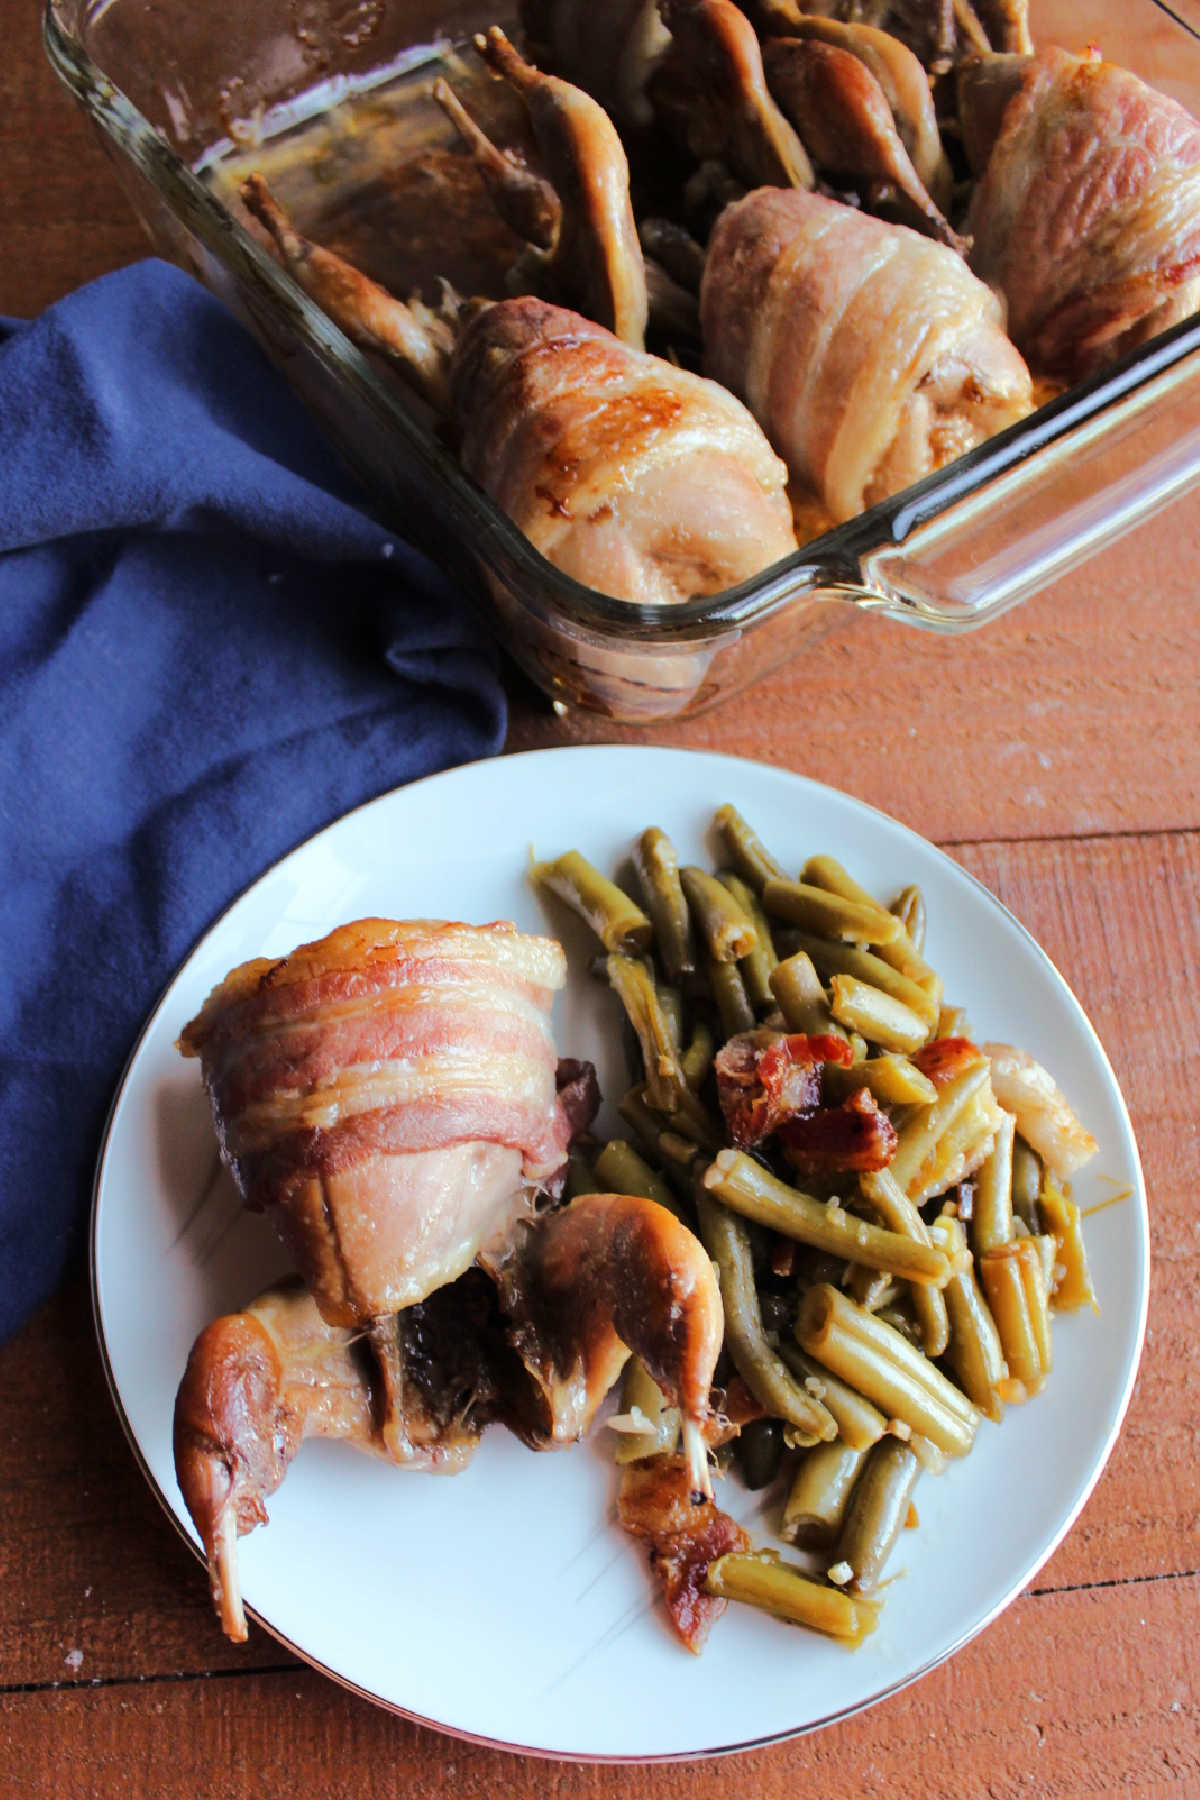 Bacon wrapped quail on plate with smothered green beans.